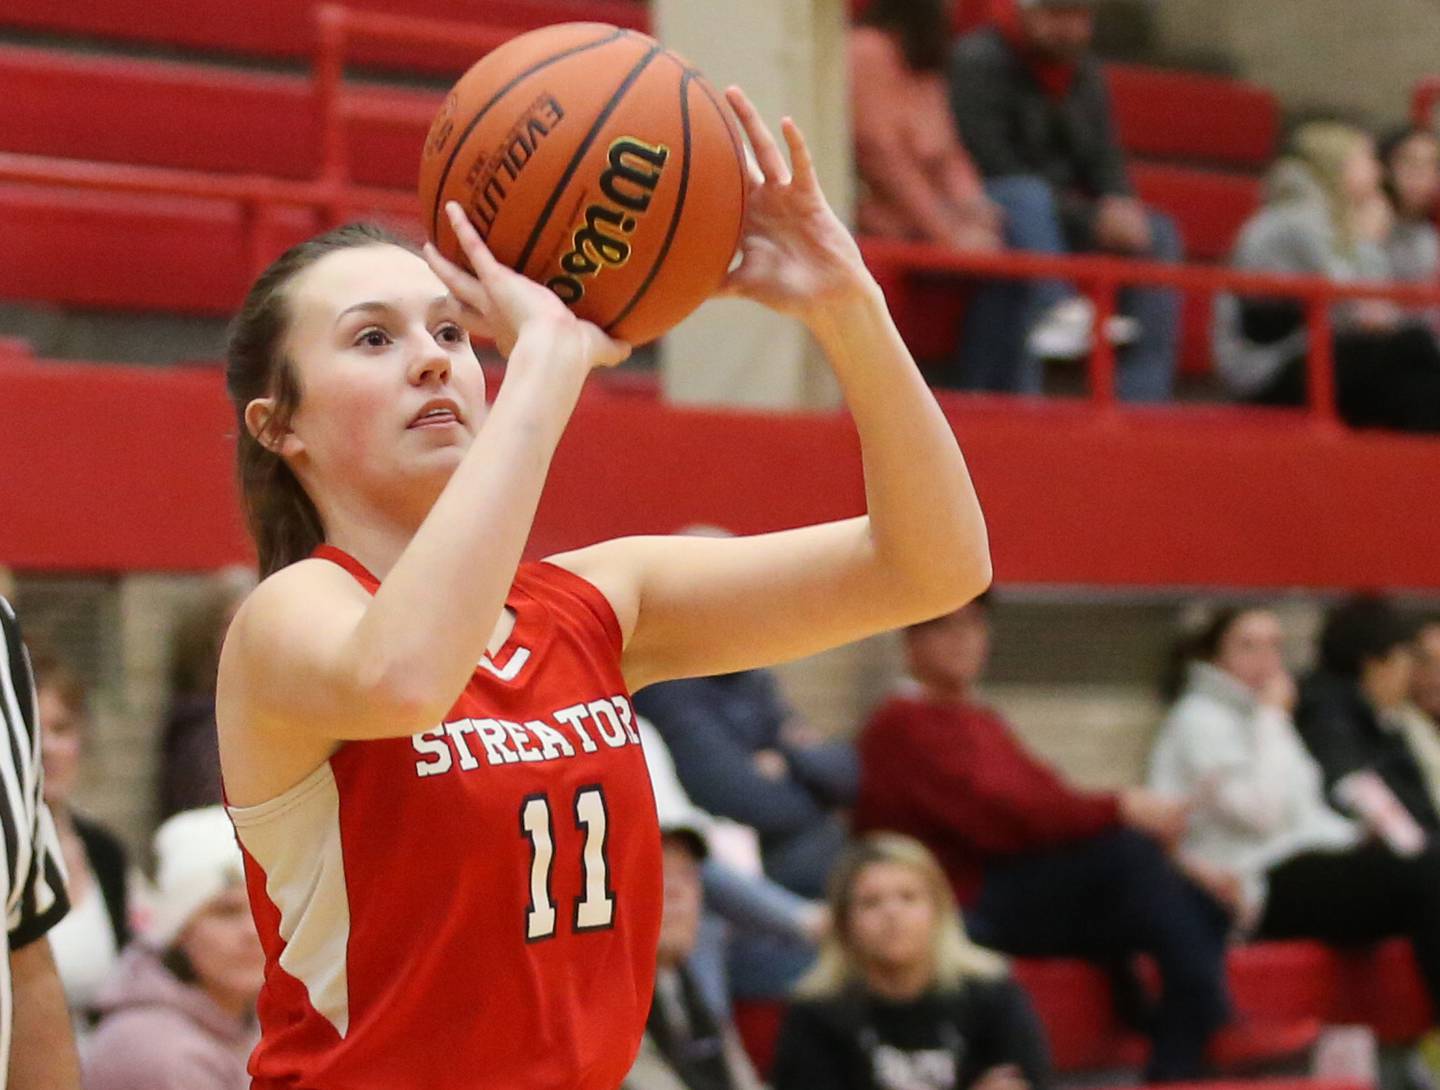 Streator's Ava Gwaltney lines up a shot during the 2023 Lady Pirate Holiday Tournament in Kingman Gym.